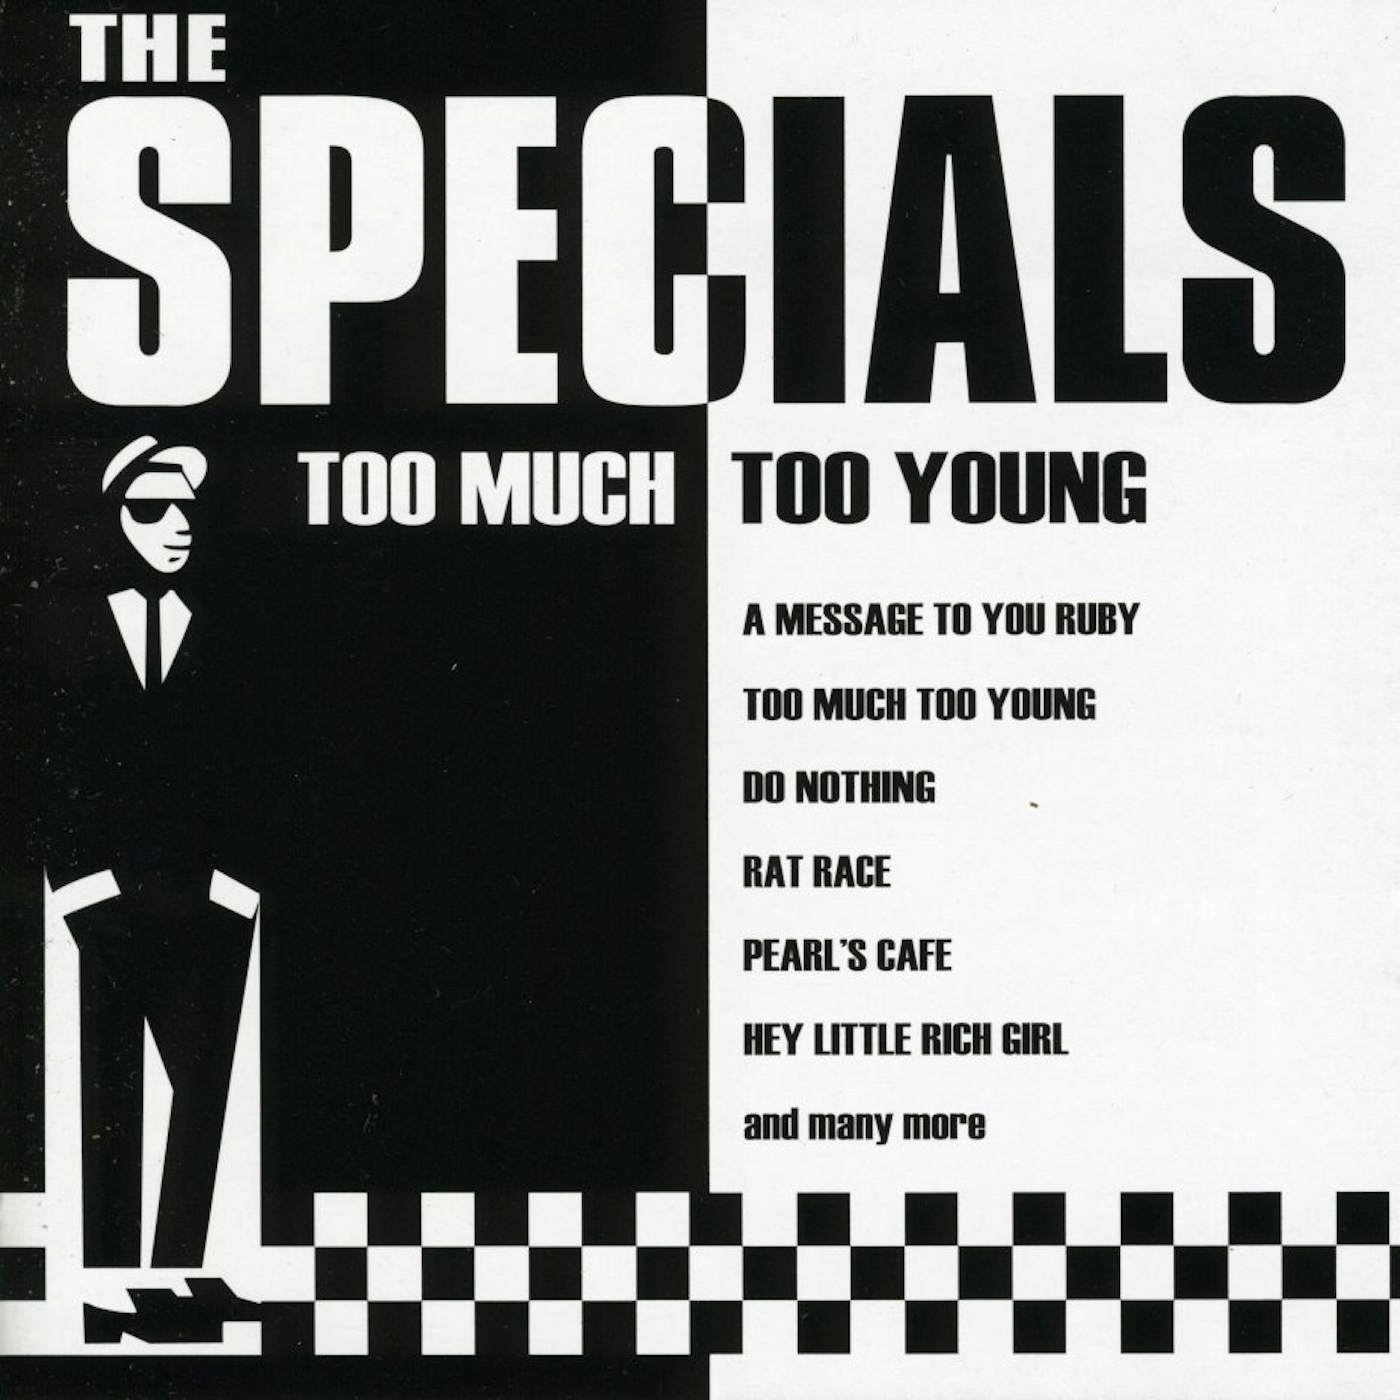 The Specials TOO MUCH TOO YOUNG CD